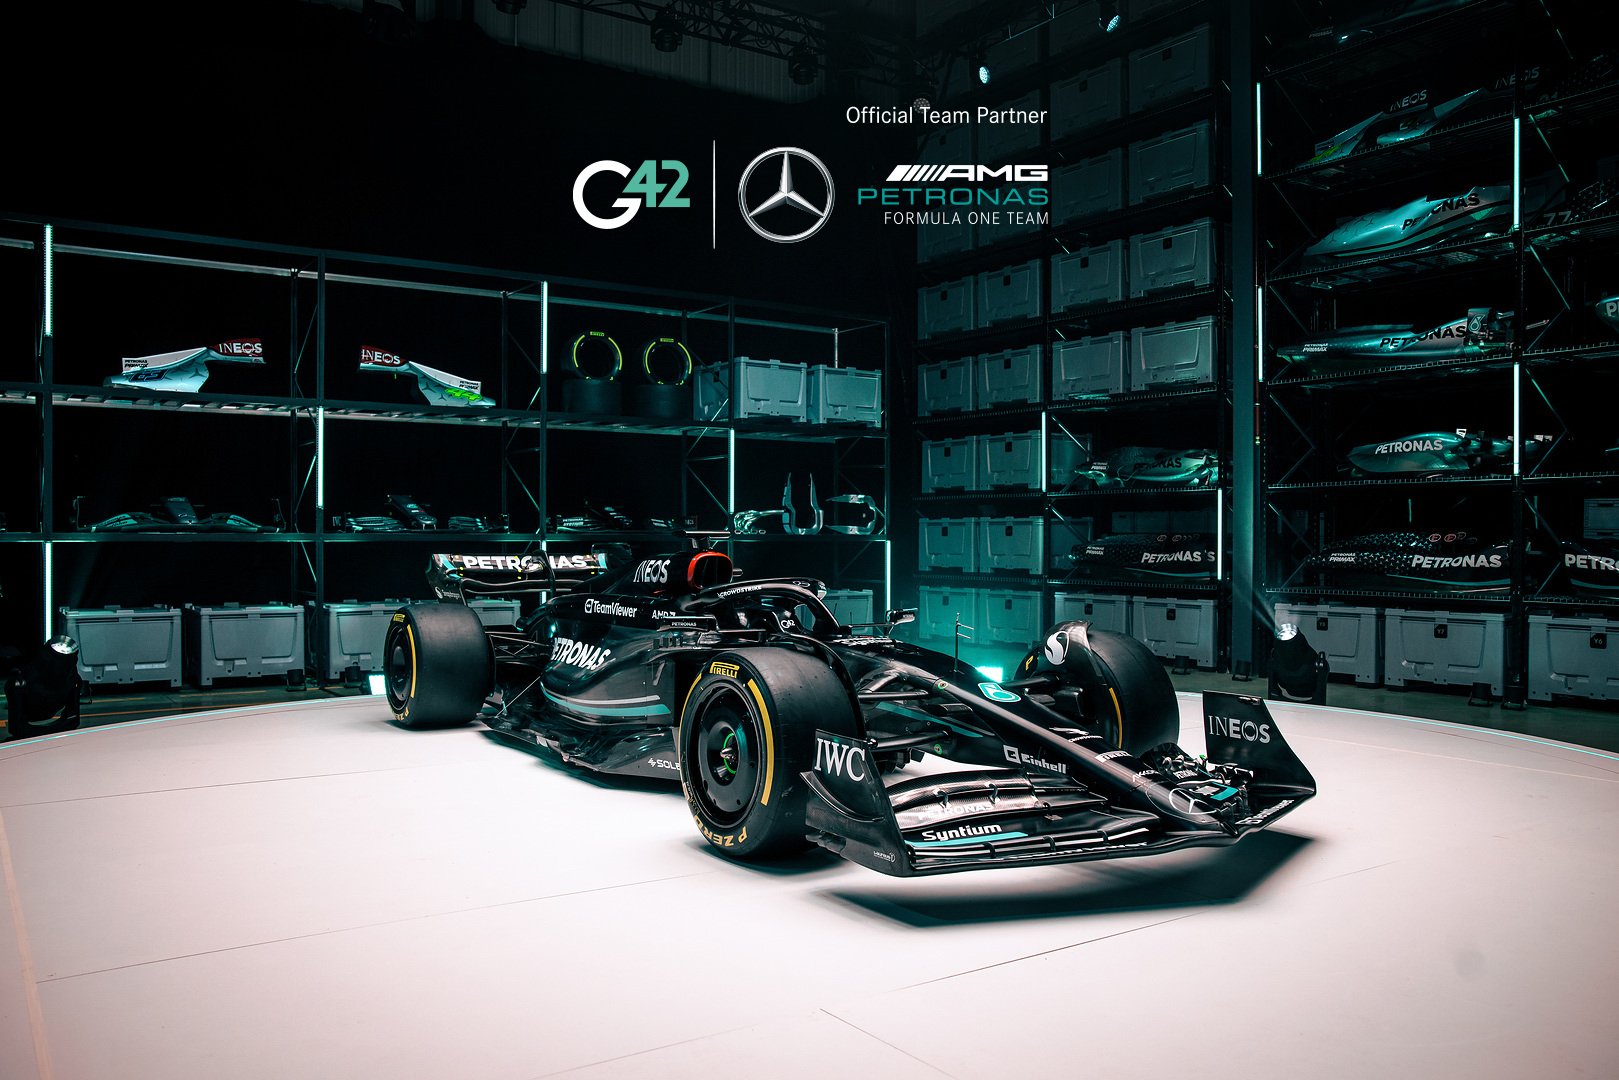 G42 partners with Mercedes Petronas F1 Team